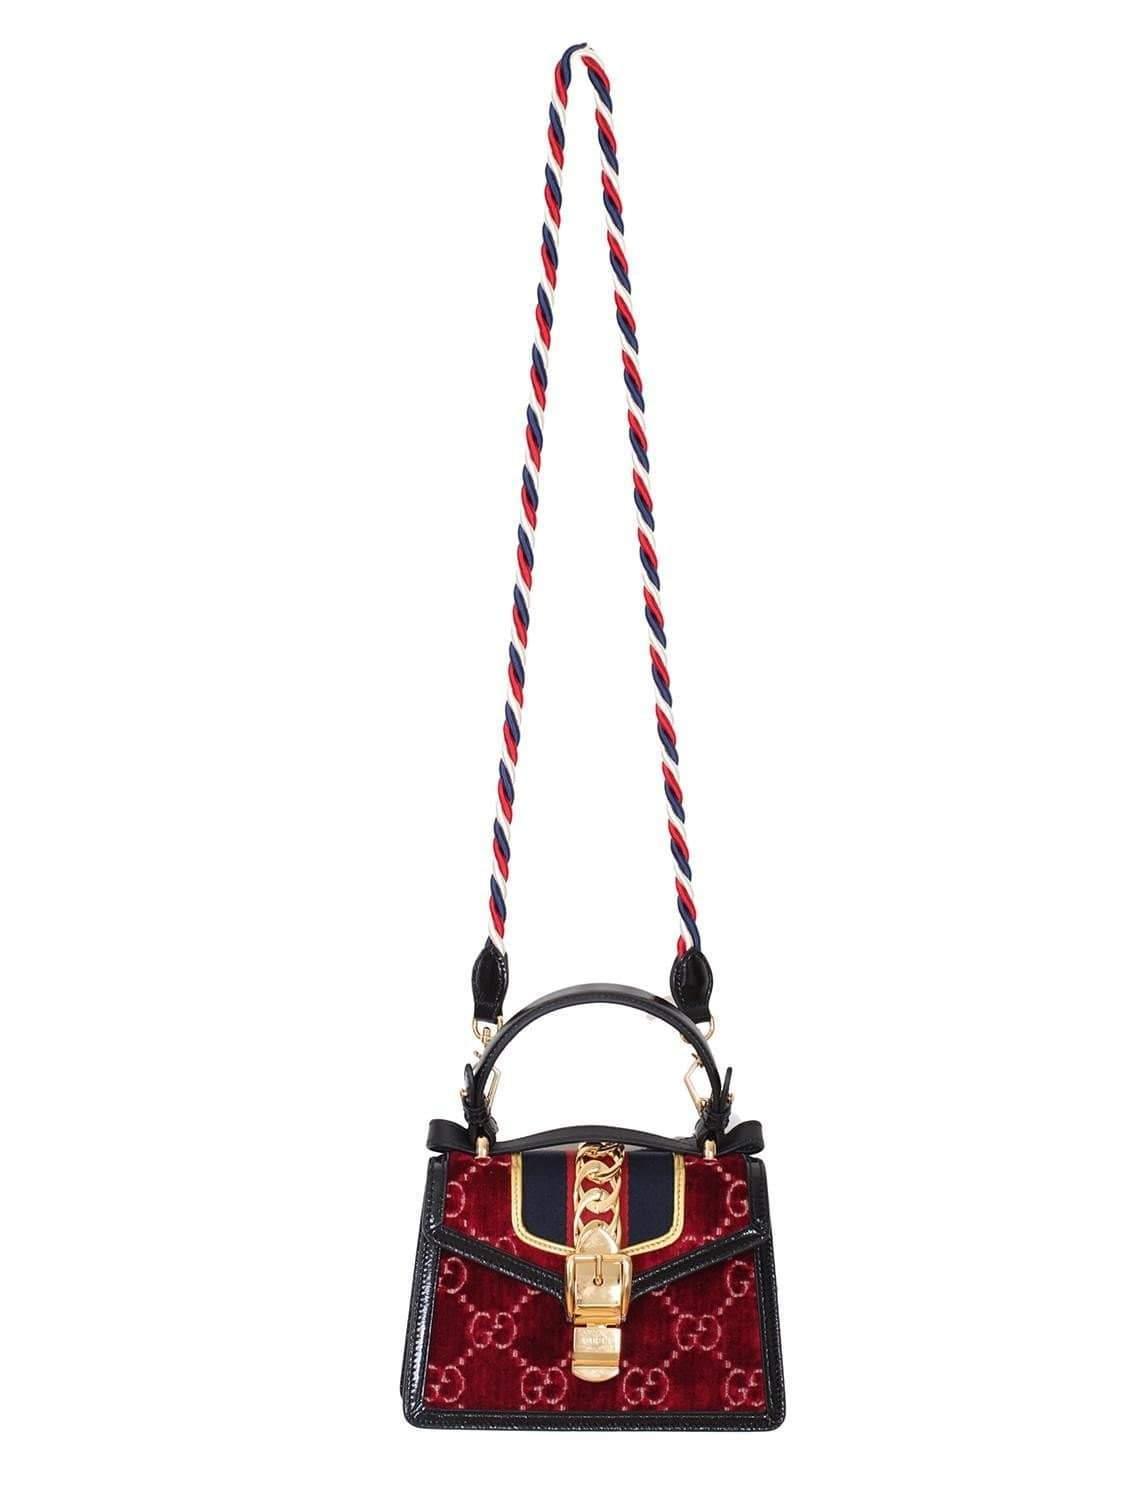 Gucci Sylvie Mini Bag In Gg Bordeaux Velvet With Black Patent Leather Trim in Red - Lyst